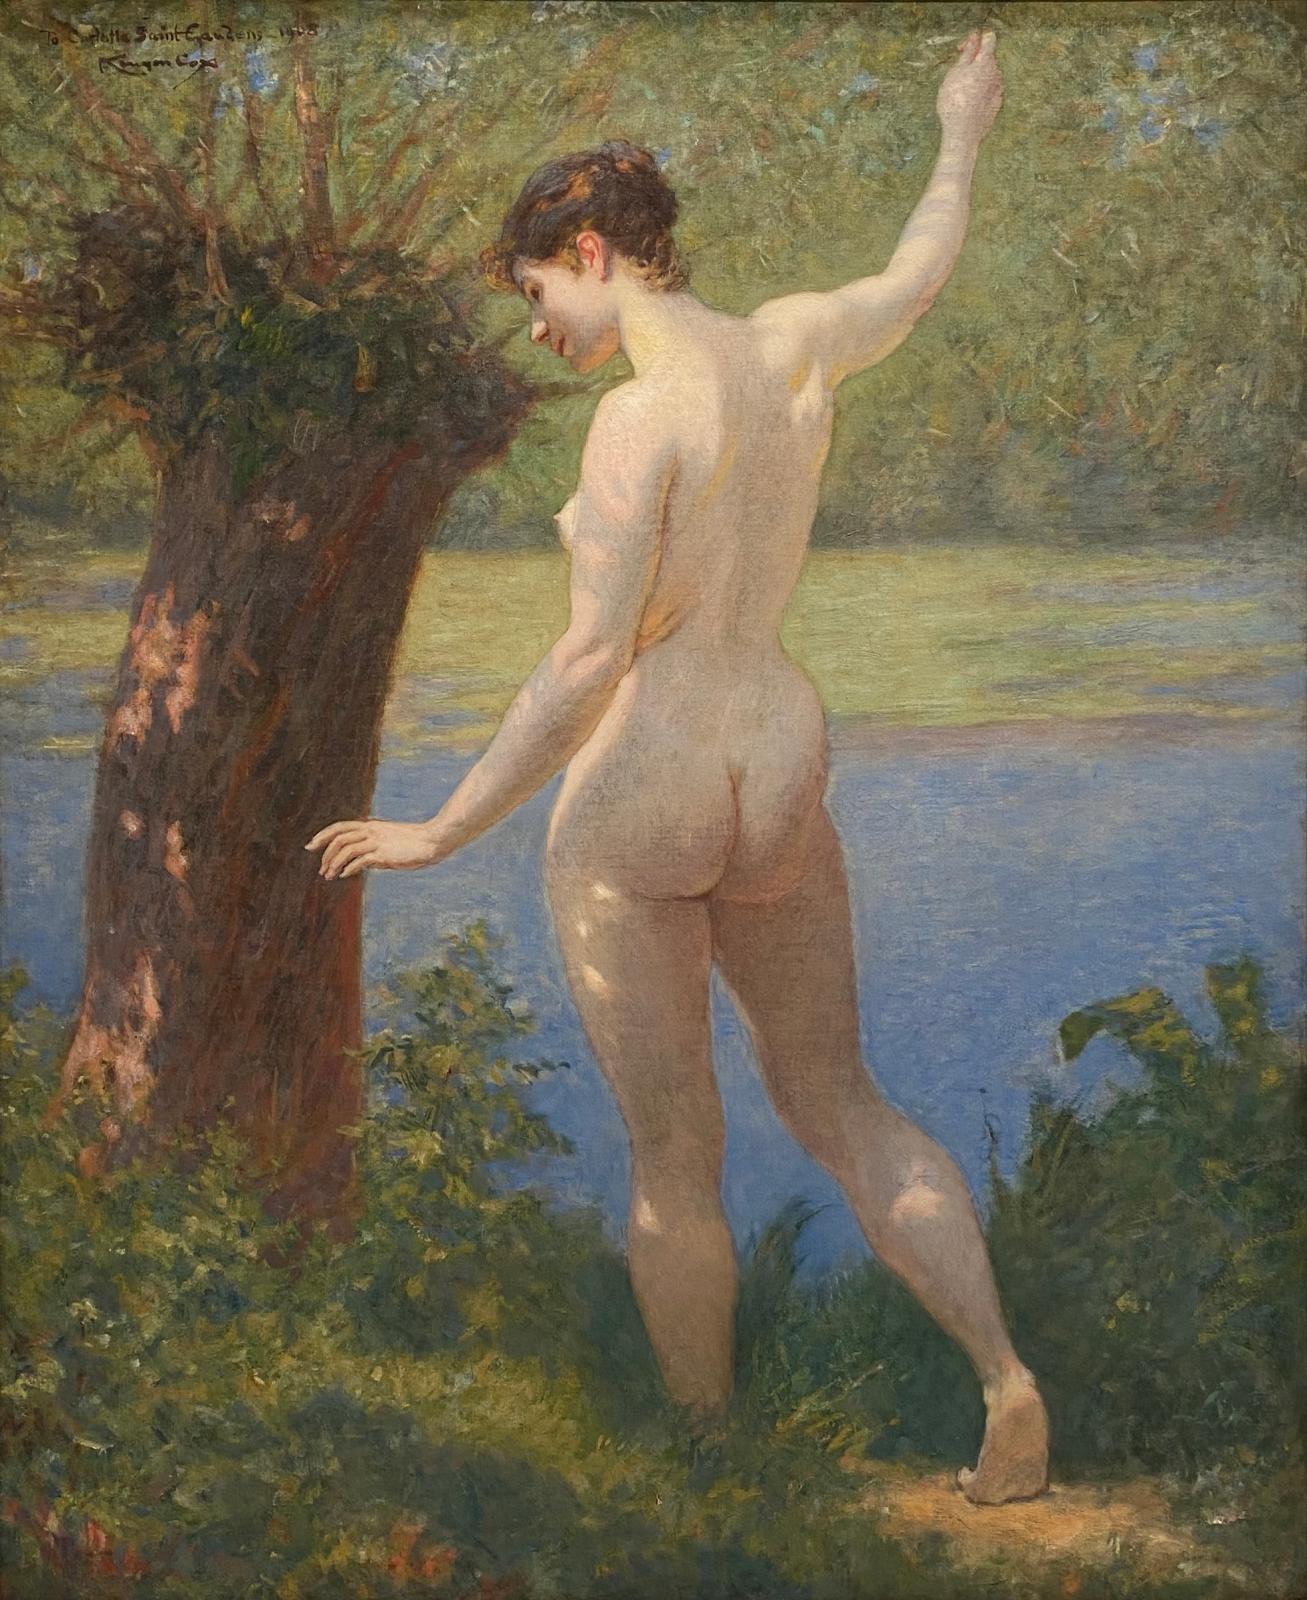 Nude by River’s Edge